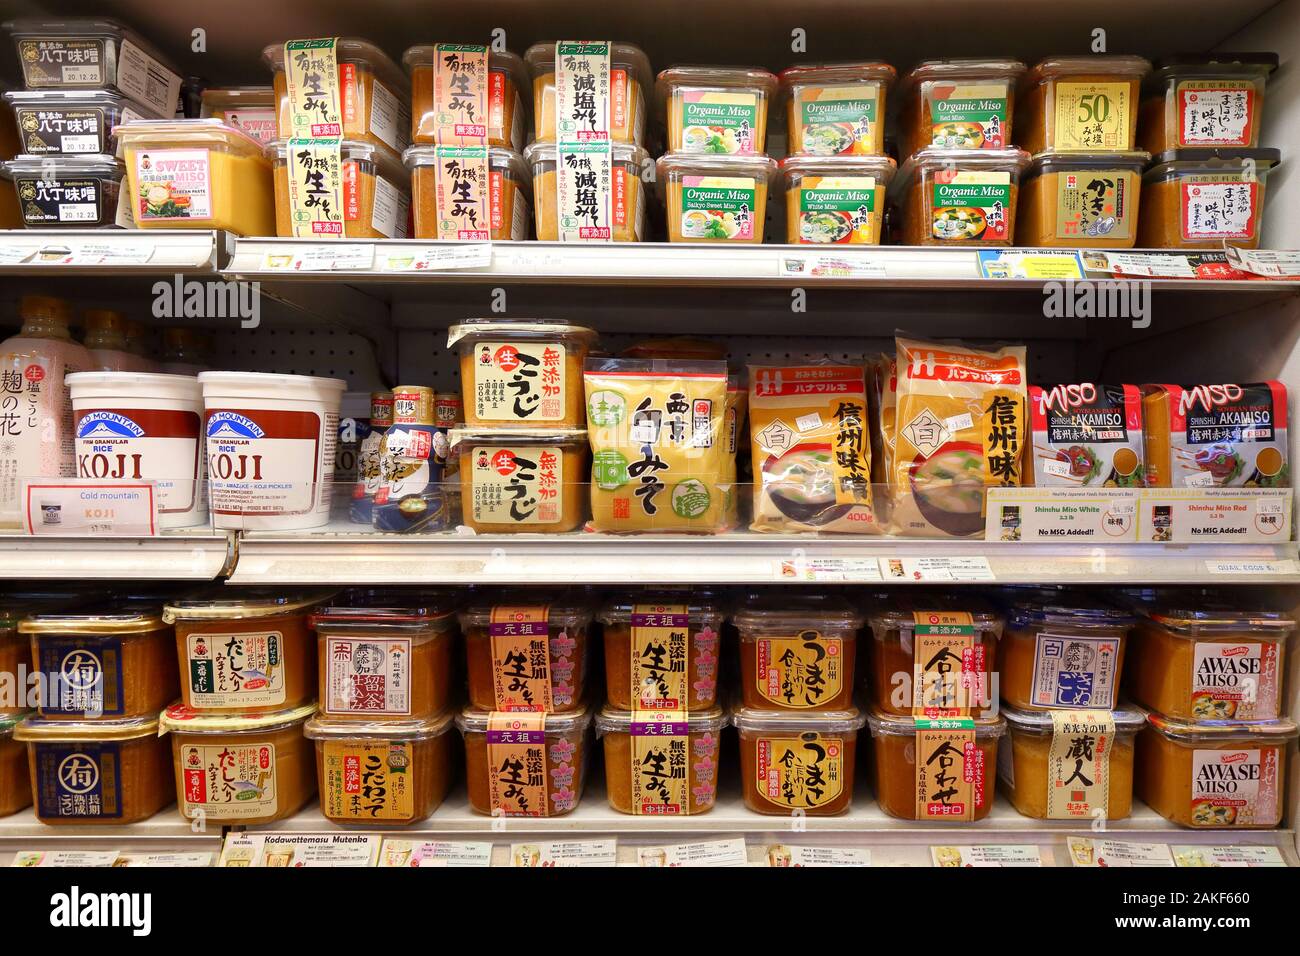 Miso paste, and fermented soybean paste on a refrigerator shelf in a Japanese-American supermarket Stock Photo